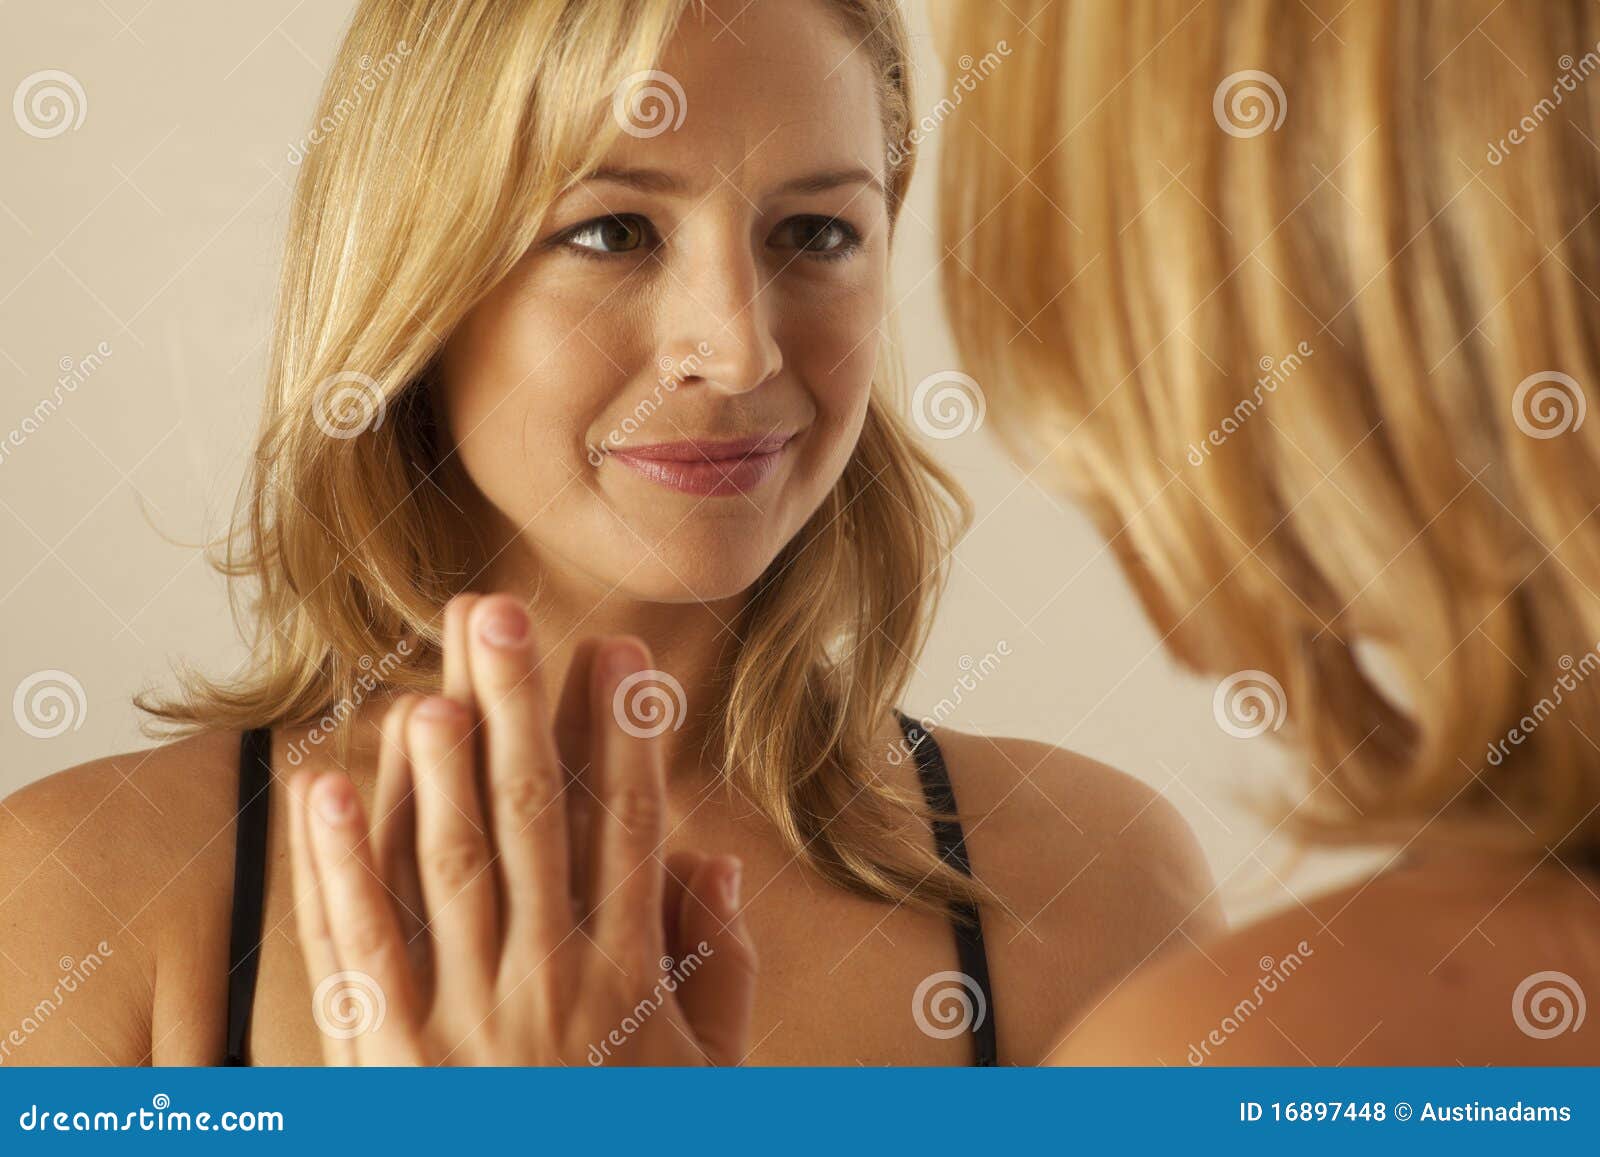 woman touching mirror while looking at reflection